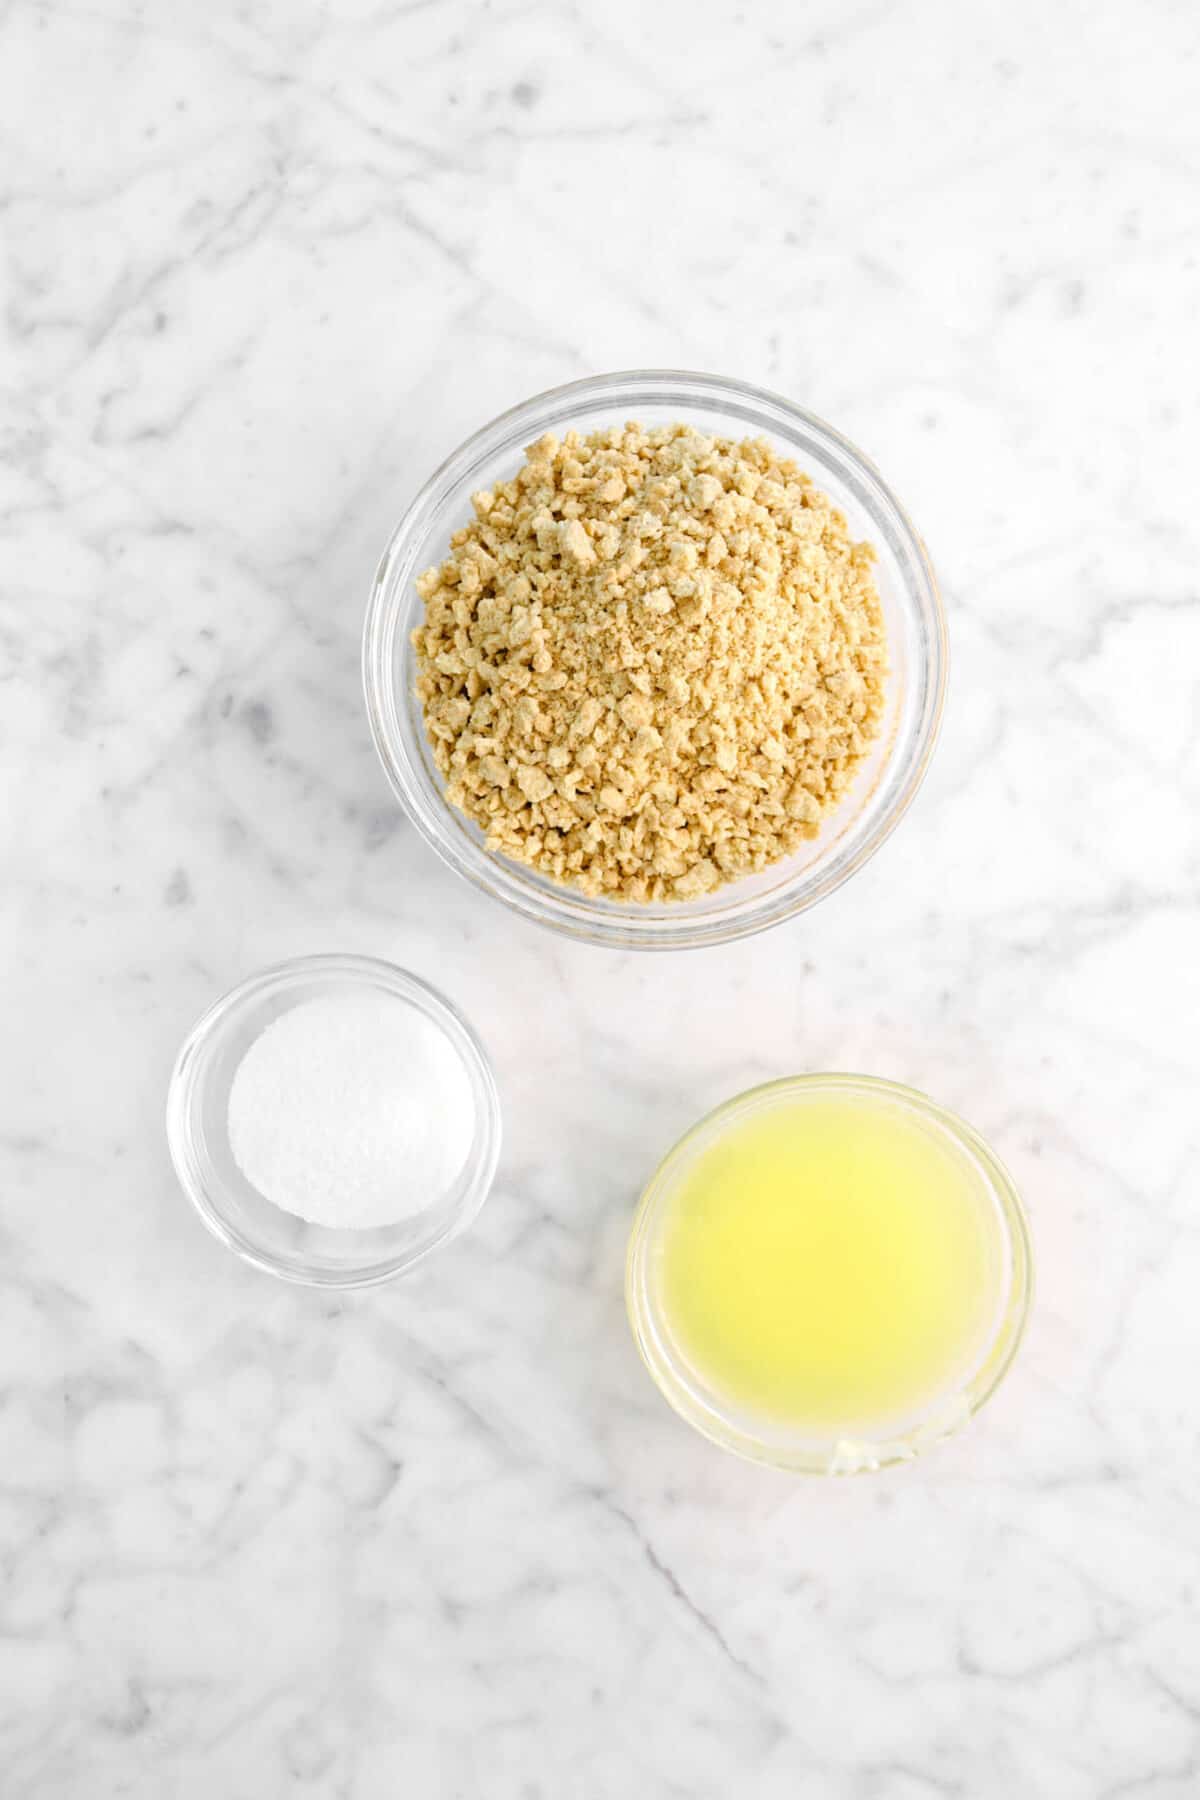 graham cracker crumbs, sugar, and melted butter in bowls on marble counter